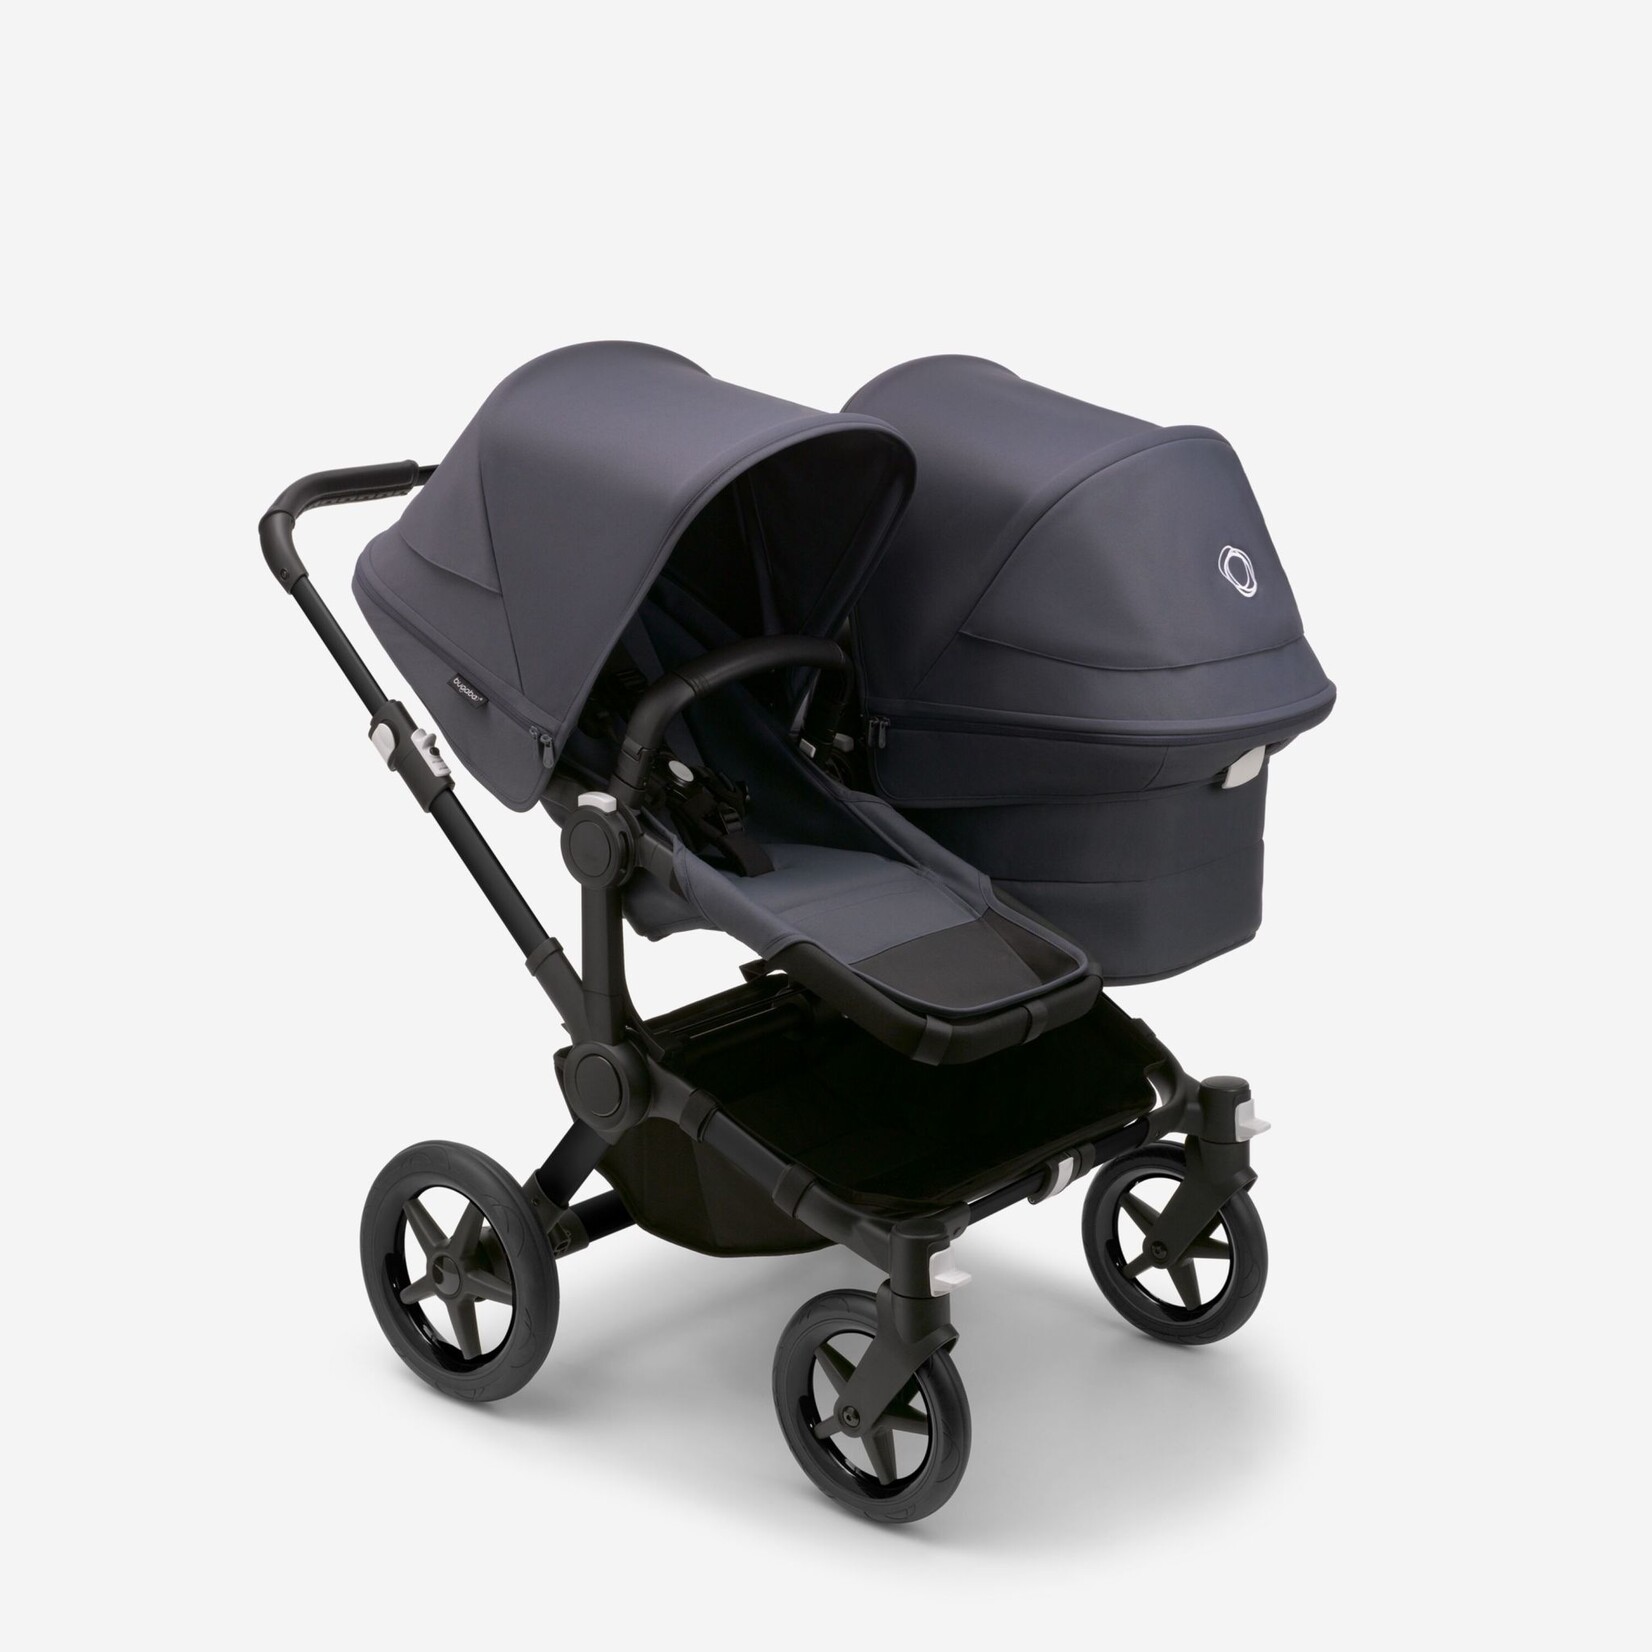 Bugaboo Donkey 5 Duo bassinet and seat pram-Stormy blue sun canopy, stormy blue fabrics, black chassis